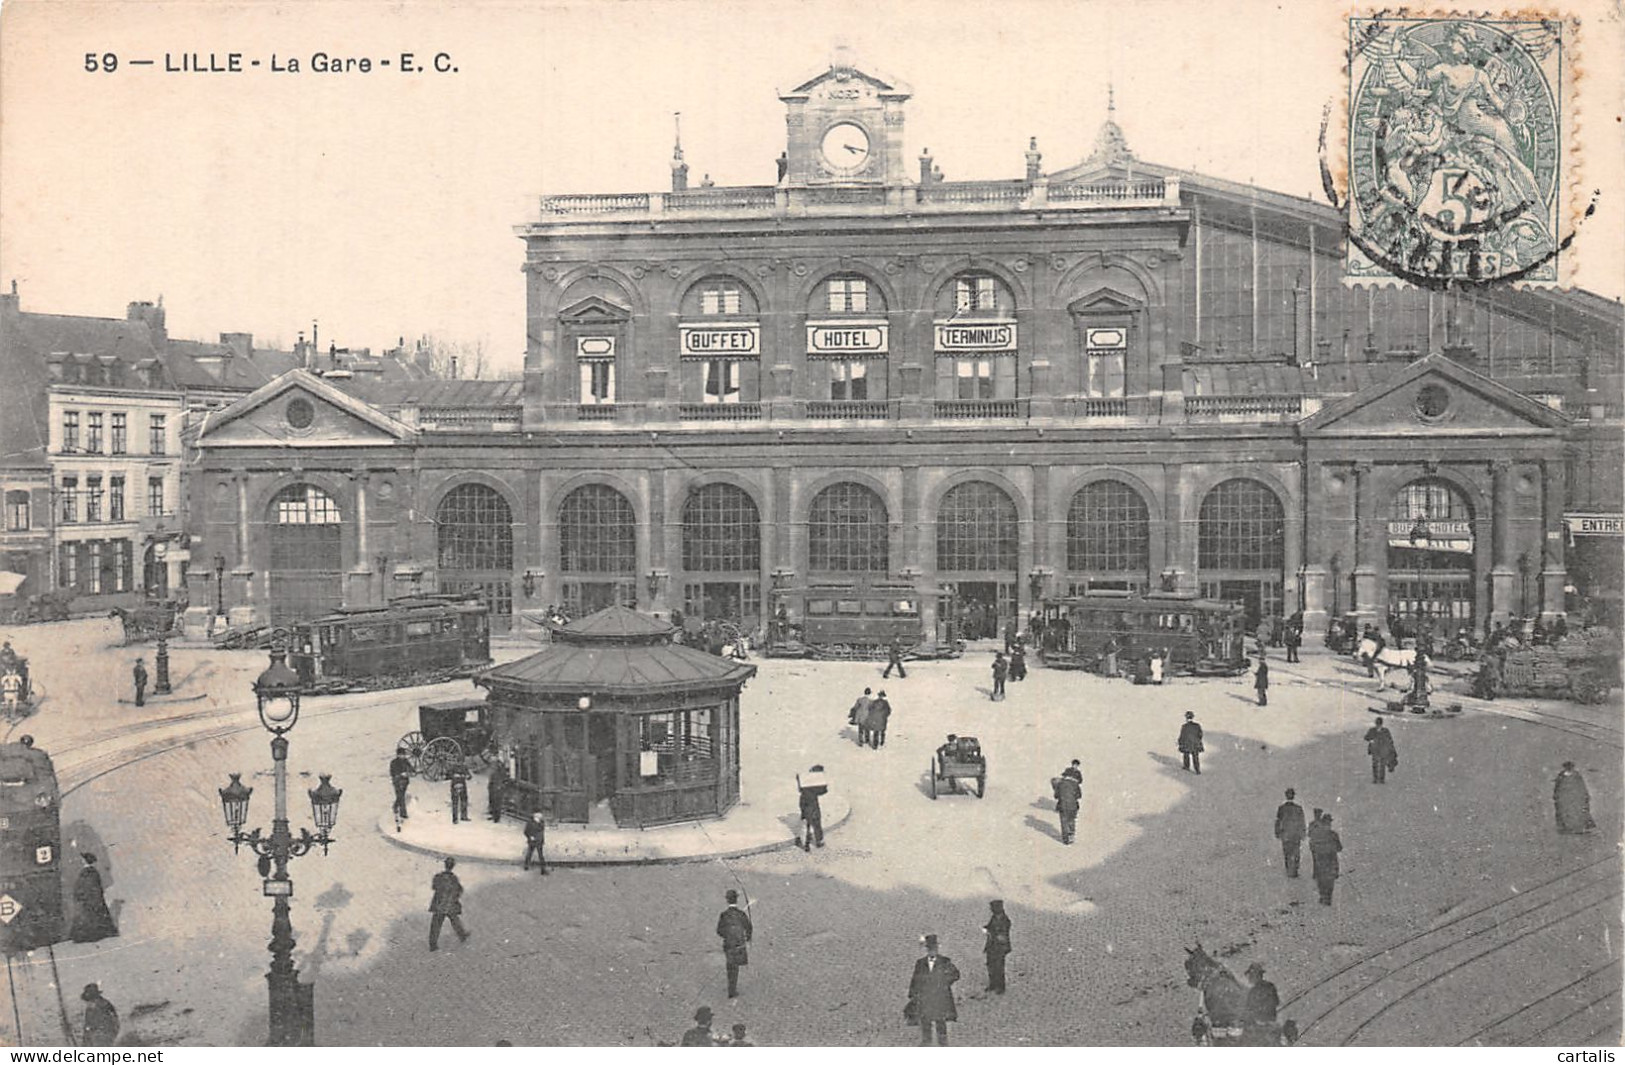 59-LILLE-N°4226-H/0207 - Lille